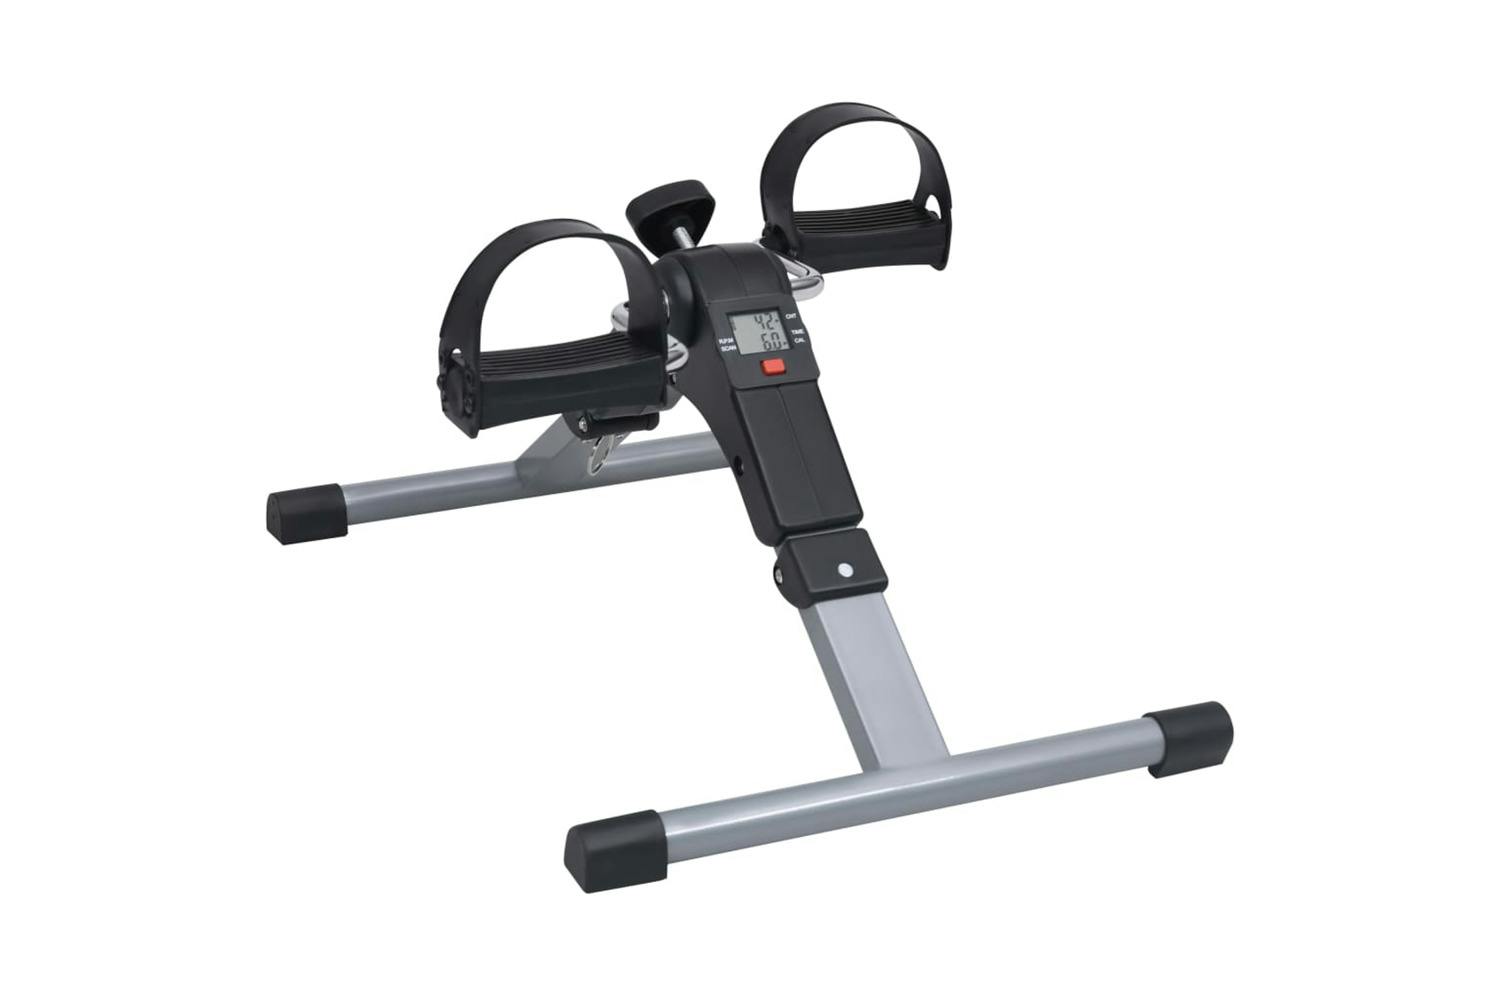 Vidaxl 92477 Pedal Exerciser For Legs And Arms With Lcd Display